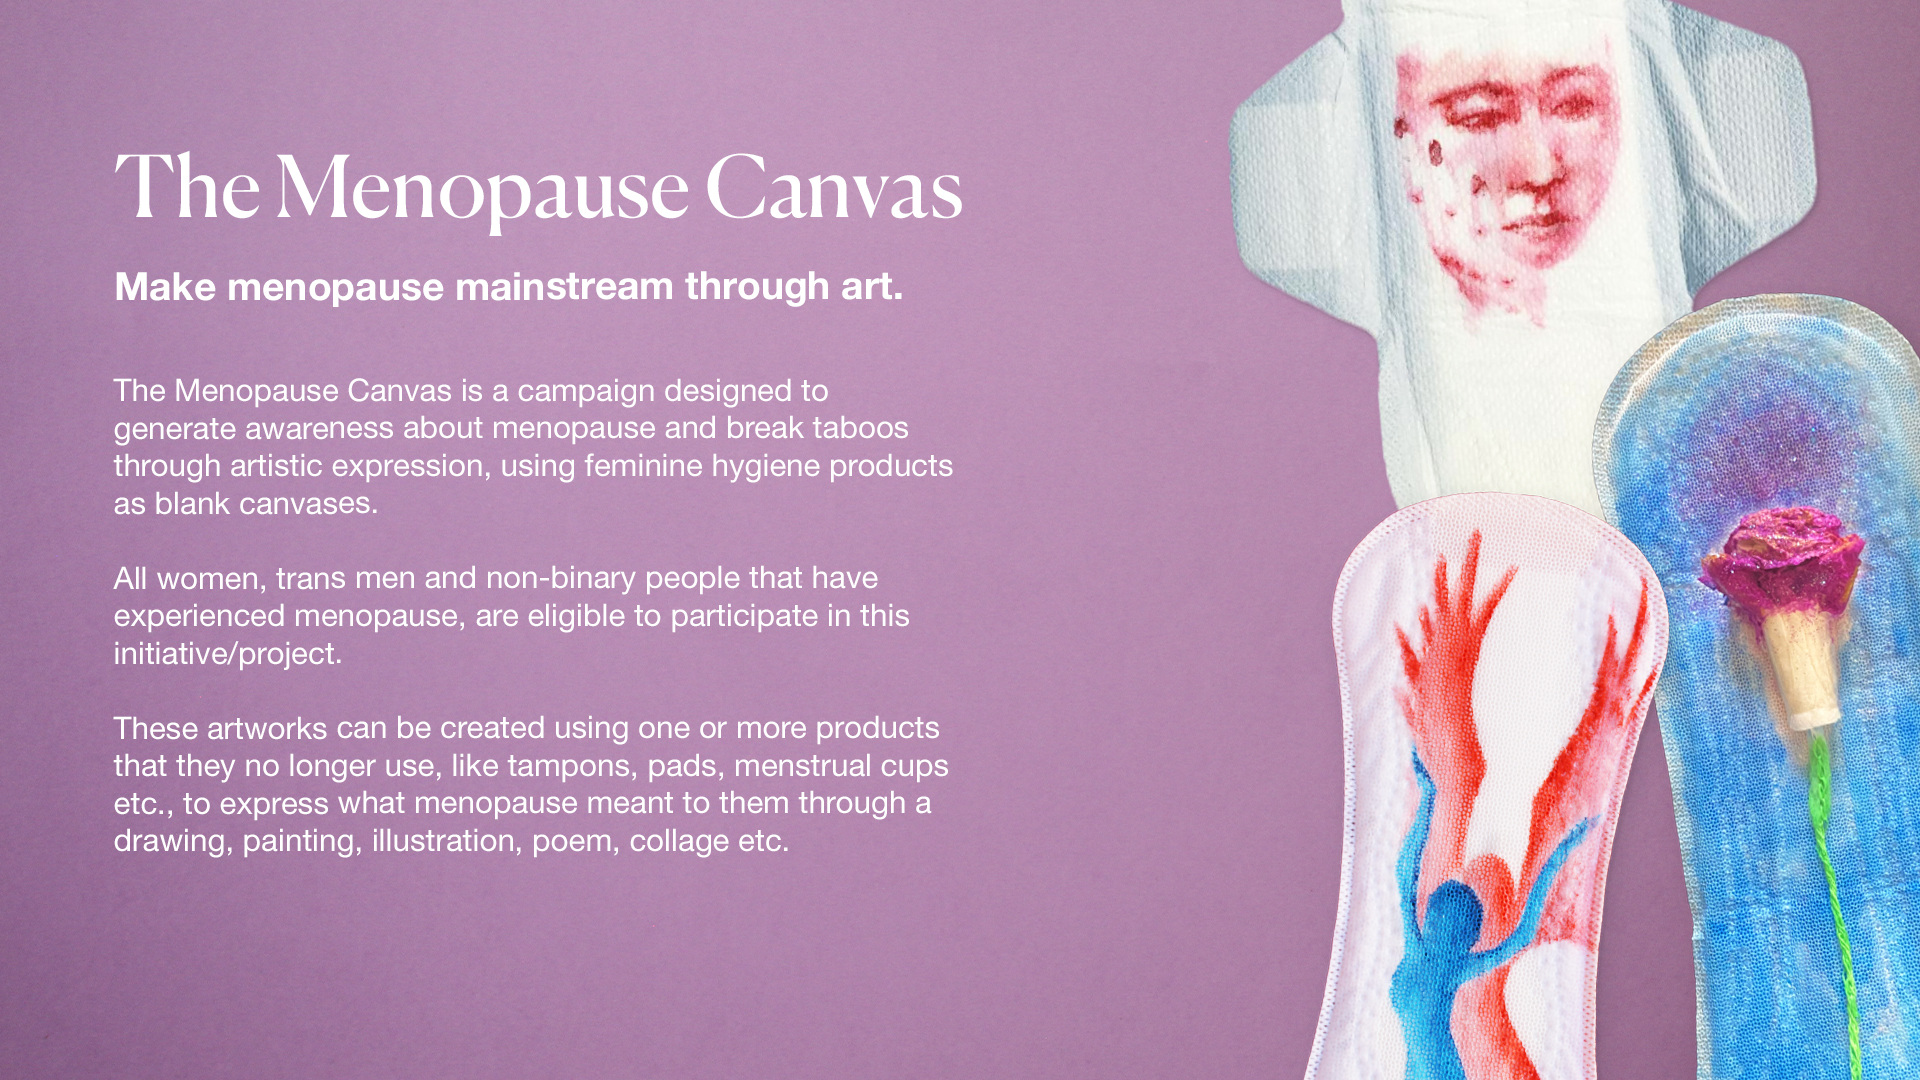 The Menopause Canvas by Andrea Proenza  - Creative Work